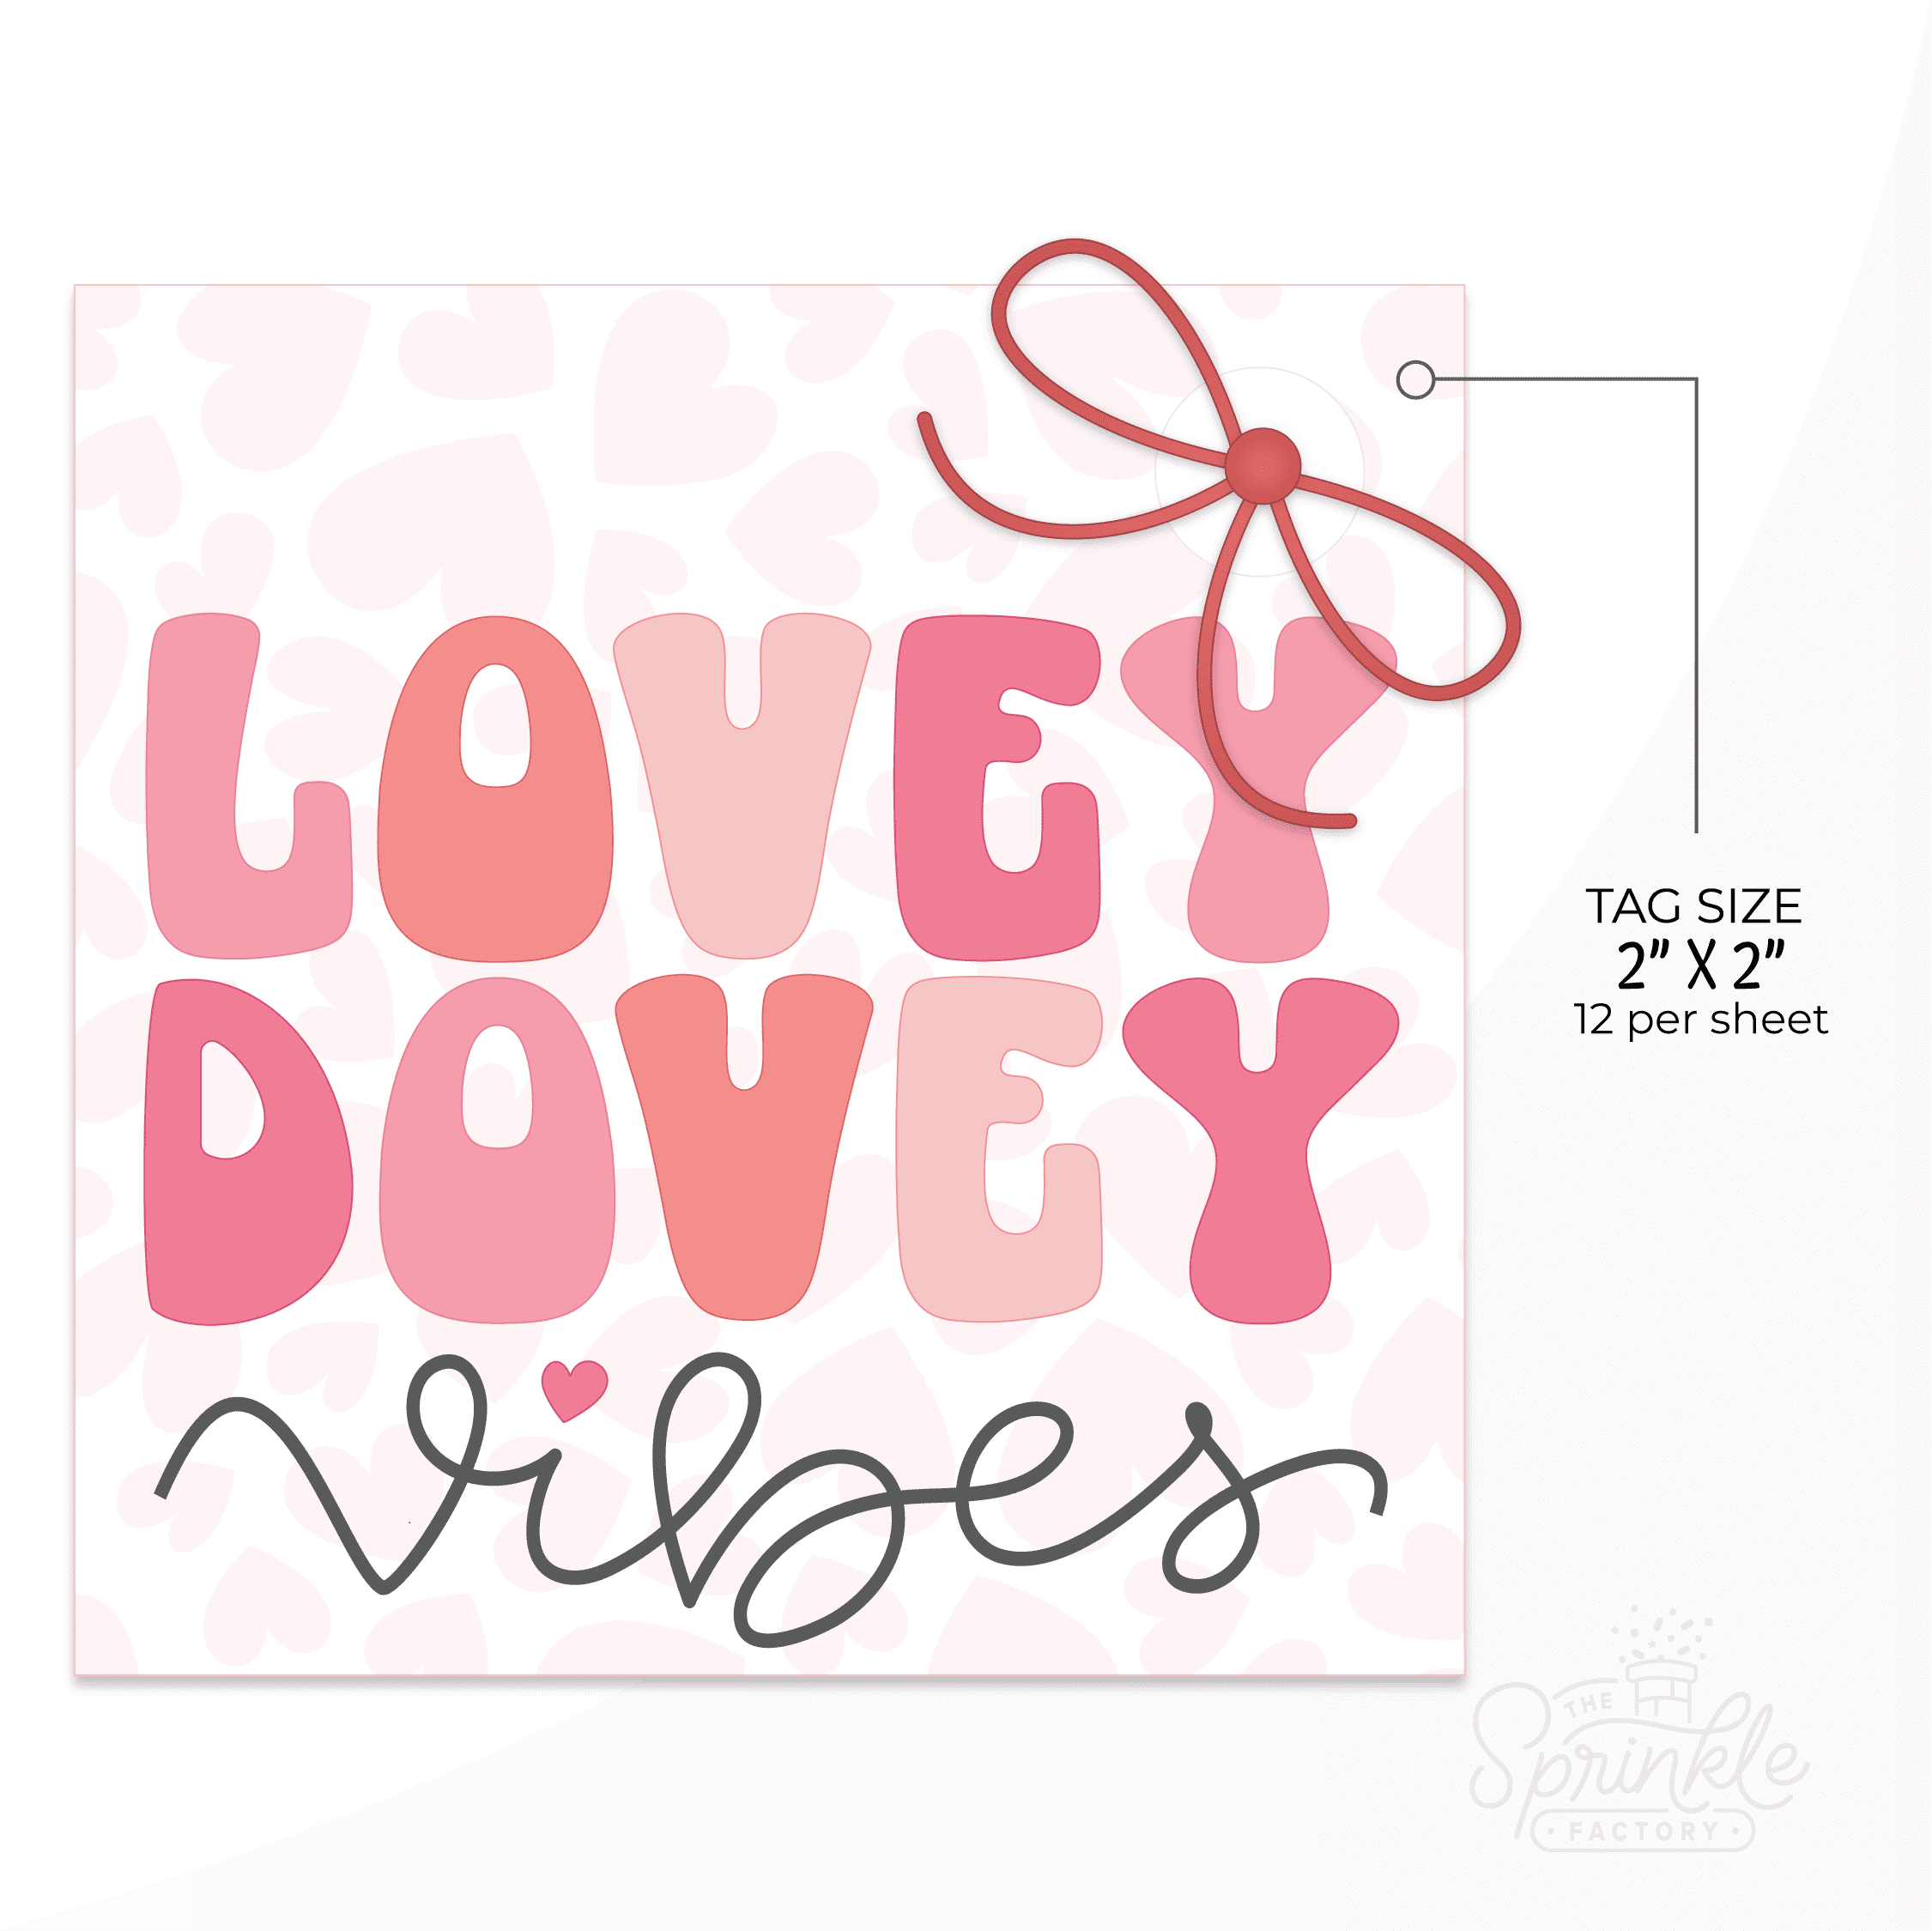 Clipart of a square white tag with a pink heart print on it with a hole for a red bow with LOVEY DOVEY written on it in alternating pink shades and vibes written below in black cursive lettering and size guide.